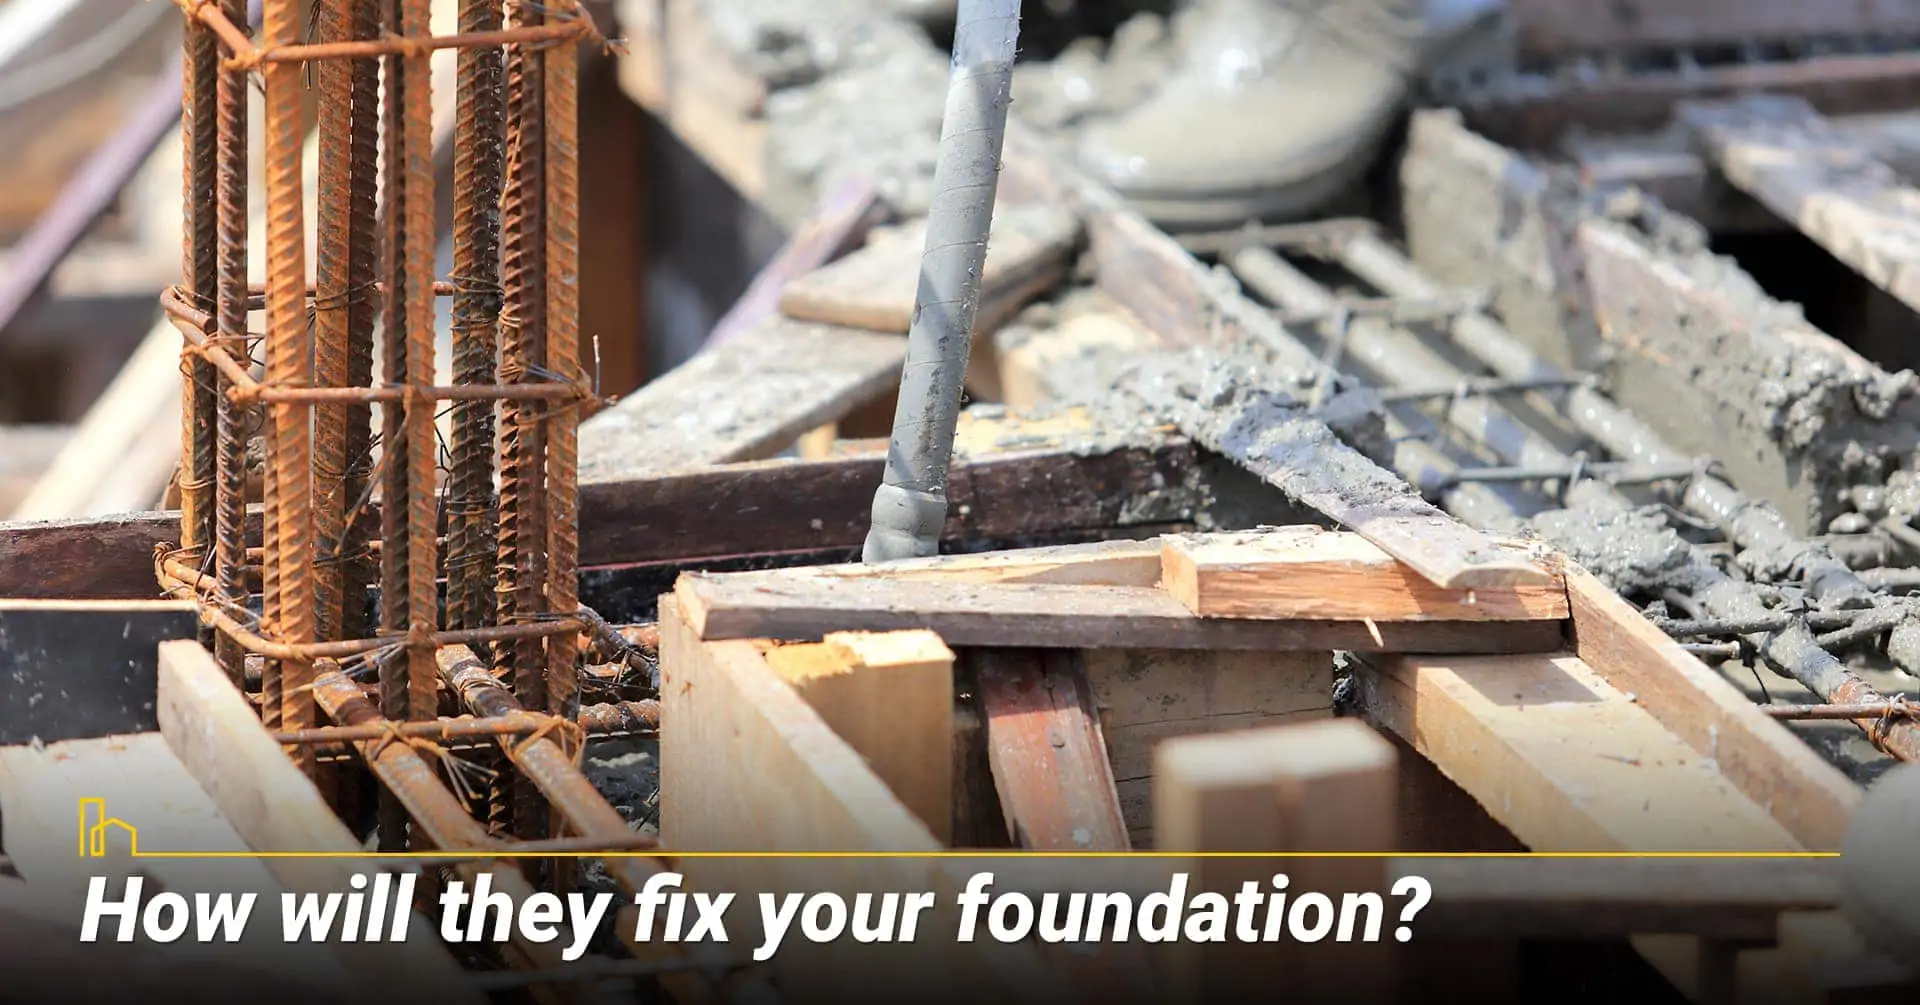 How will they fix your foundation? steps to fix foundation